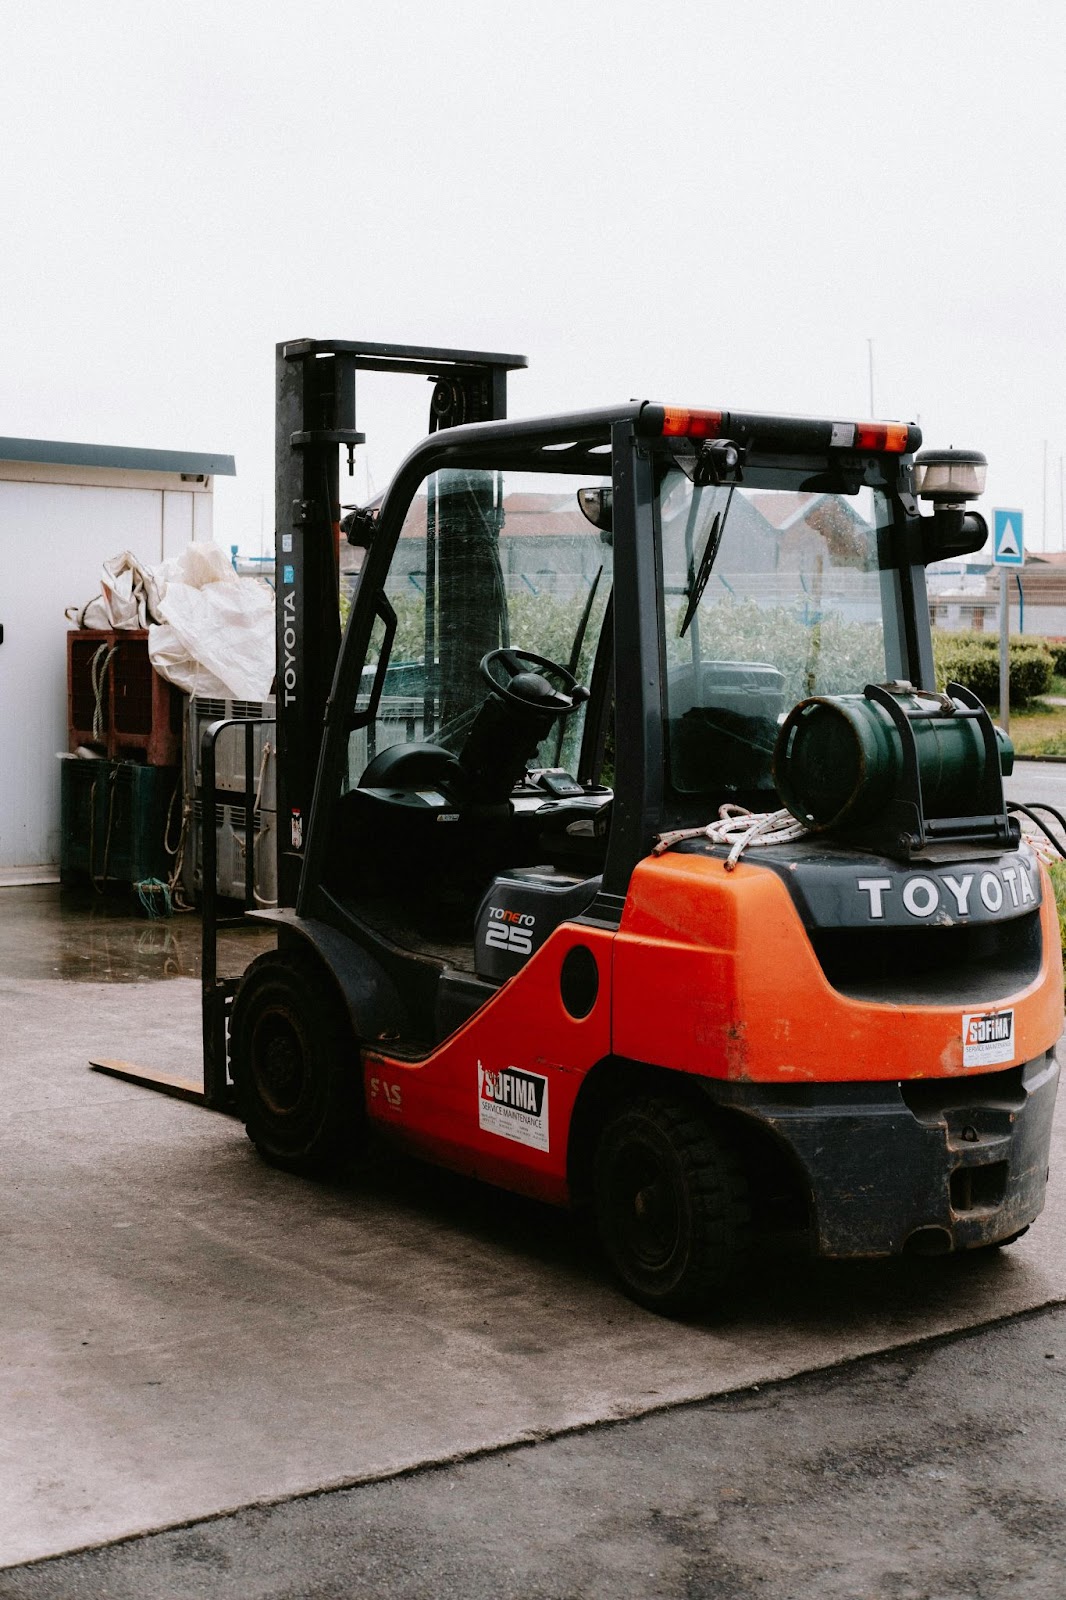 An orange class-I forklift located outside